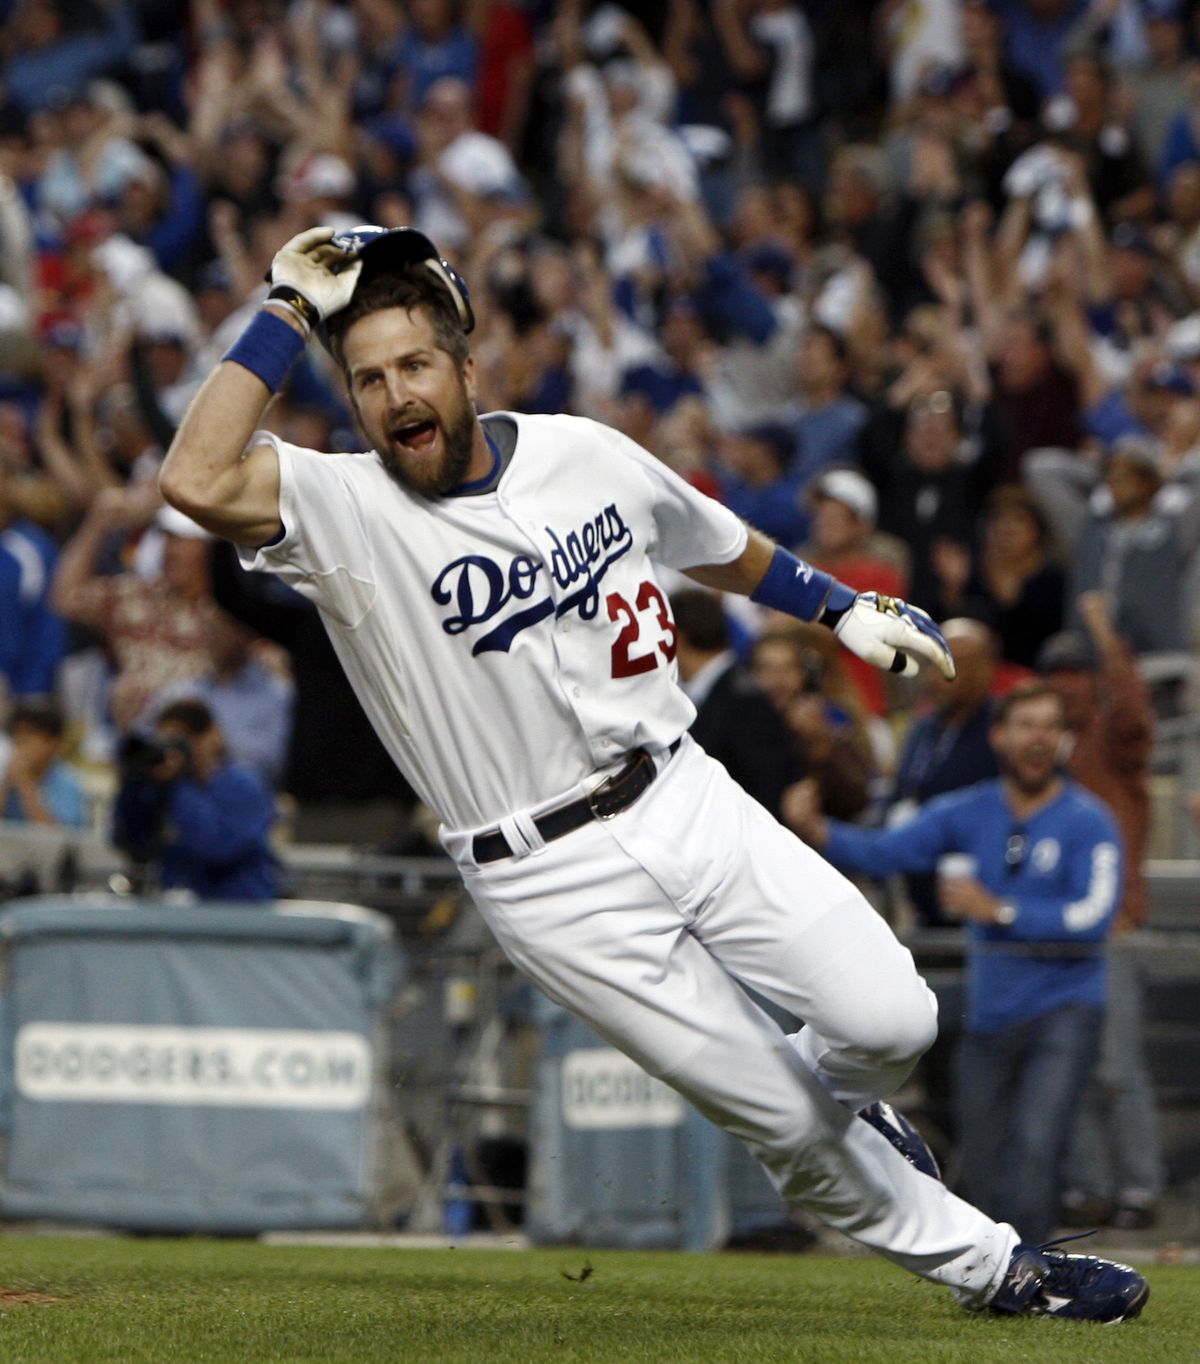 Casey Blake scores the winning run for the Los Angeles Dodgers in the bottom of the ninth inning.  (Associated Press / The Spokesman-Review)